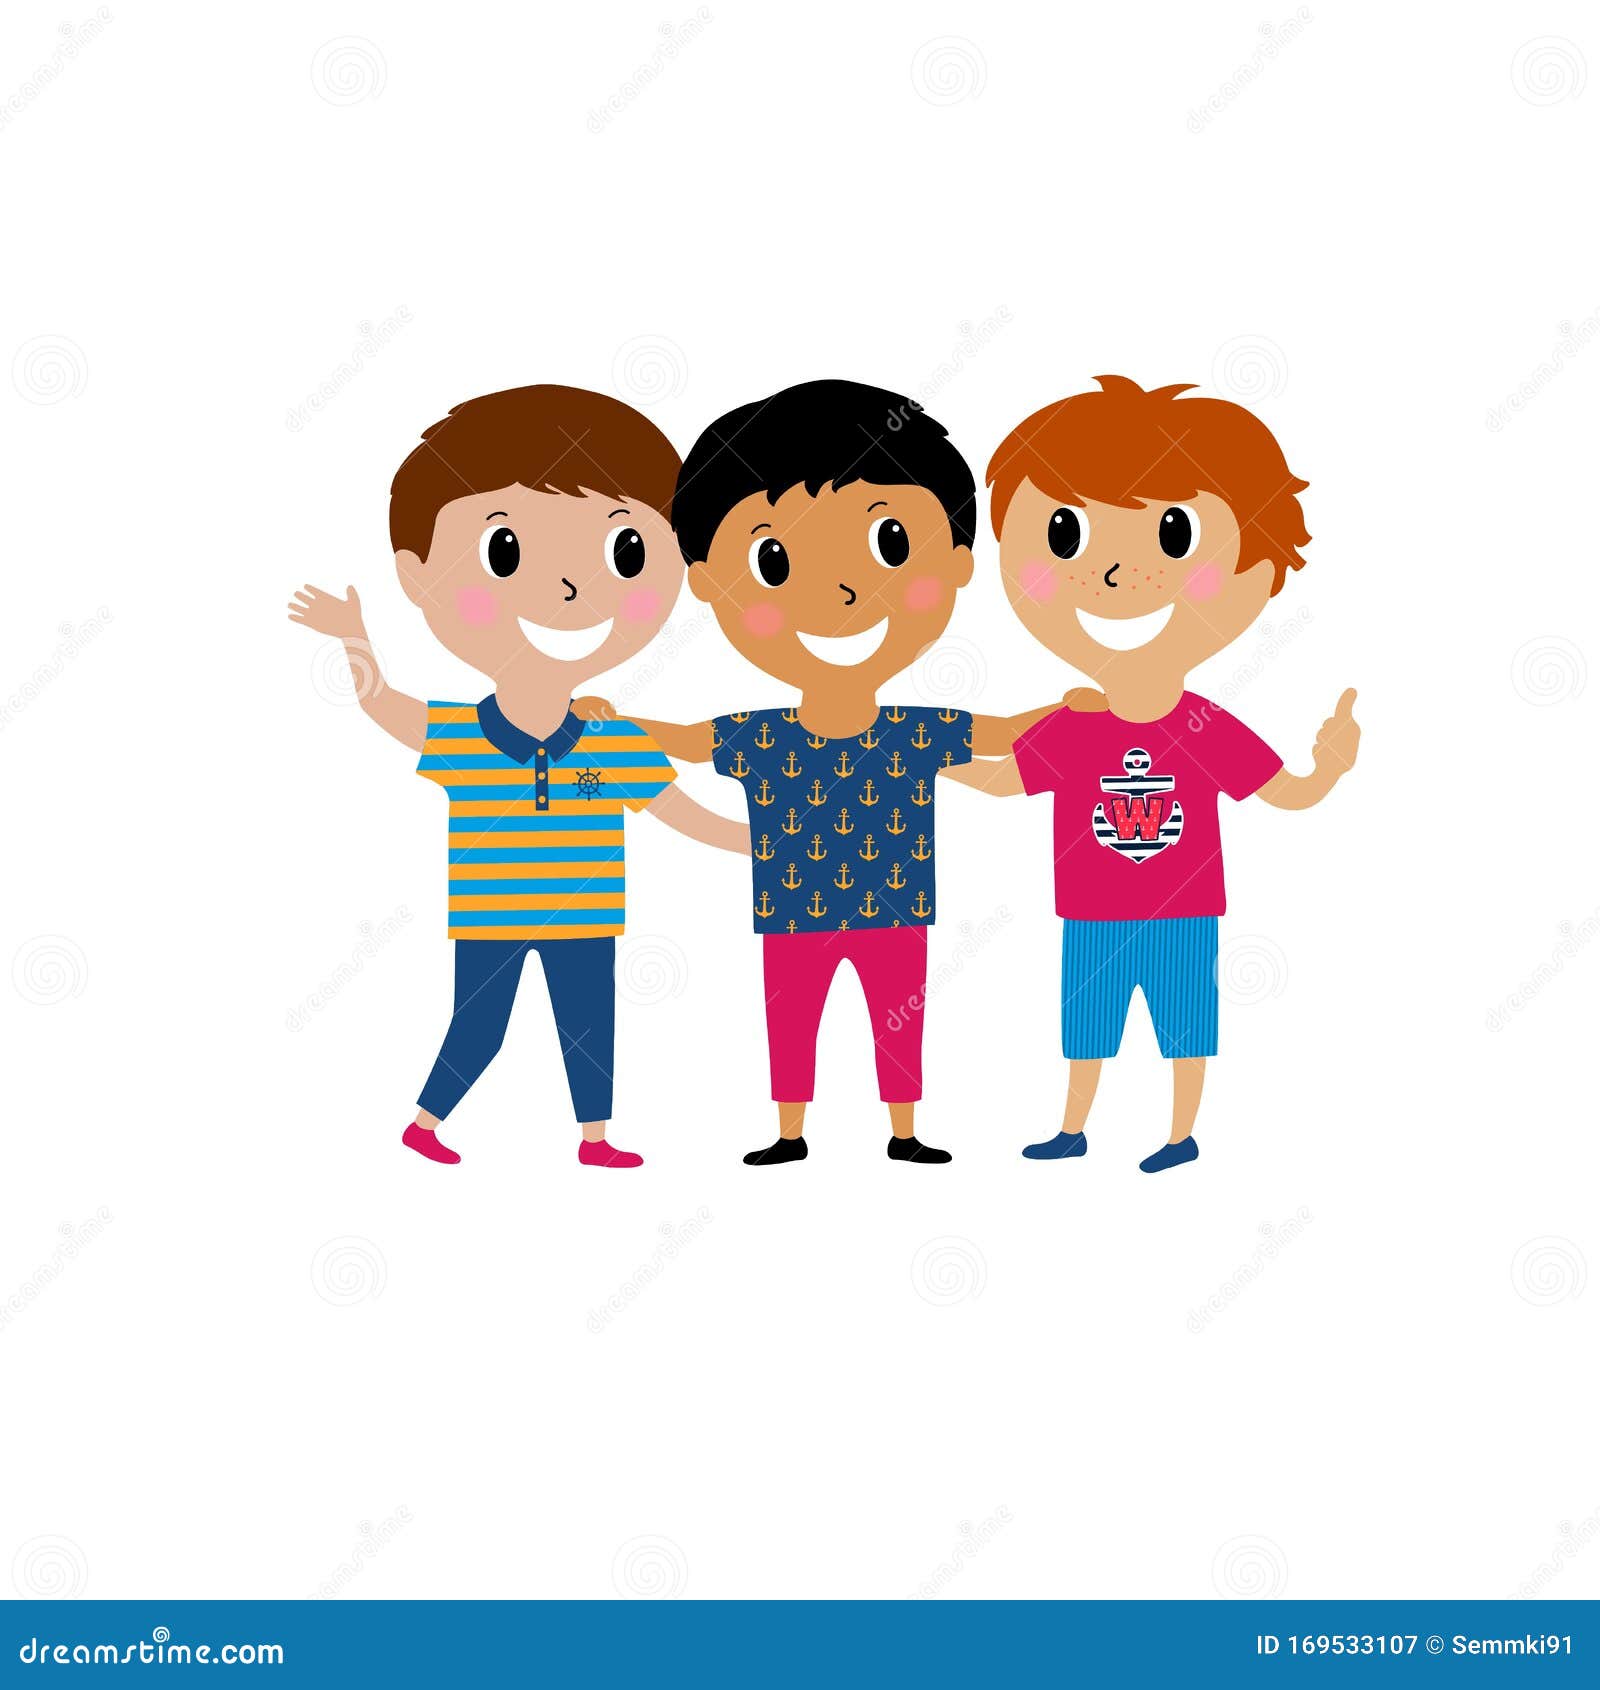 Cute Kids Smiling Cartoon Isolated on White Background. Three Best Friends.  Concept Vector of Friendship Stock Illustration - Illustration of human,  positive: 169533107